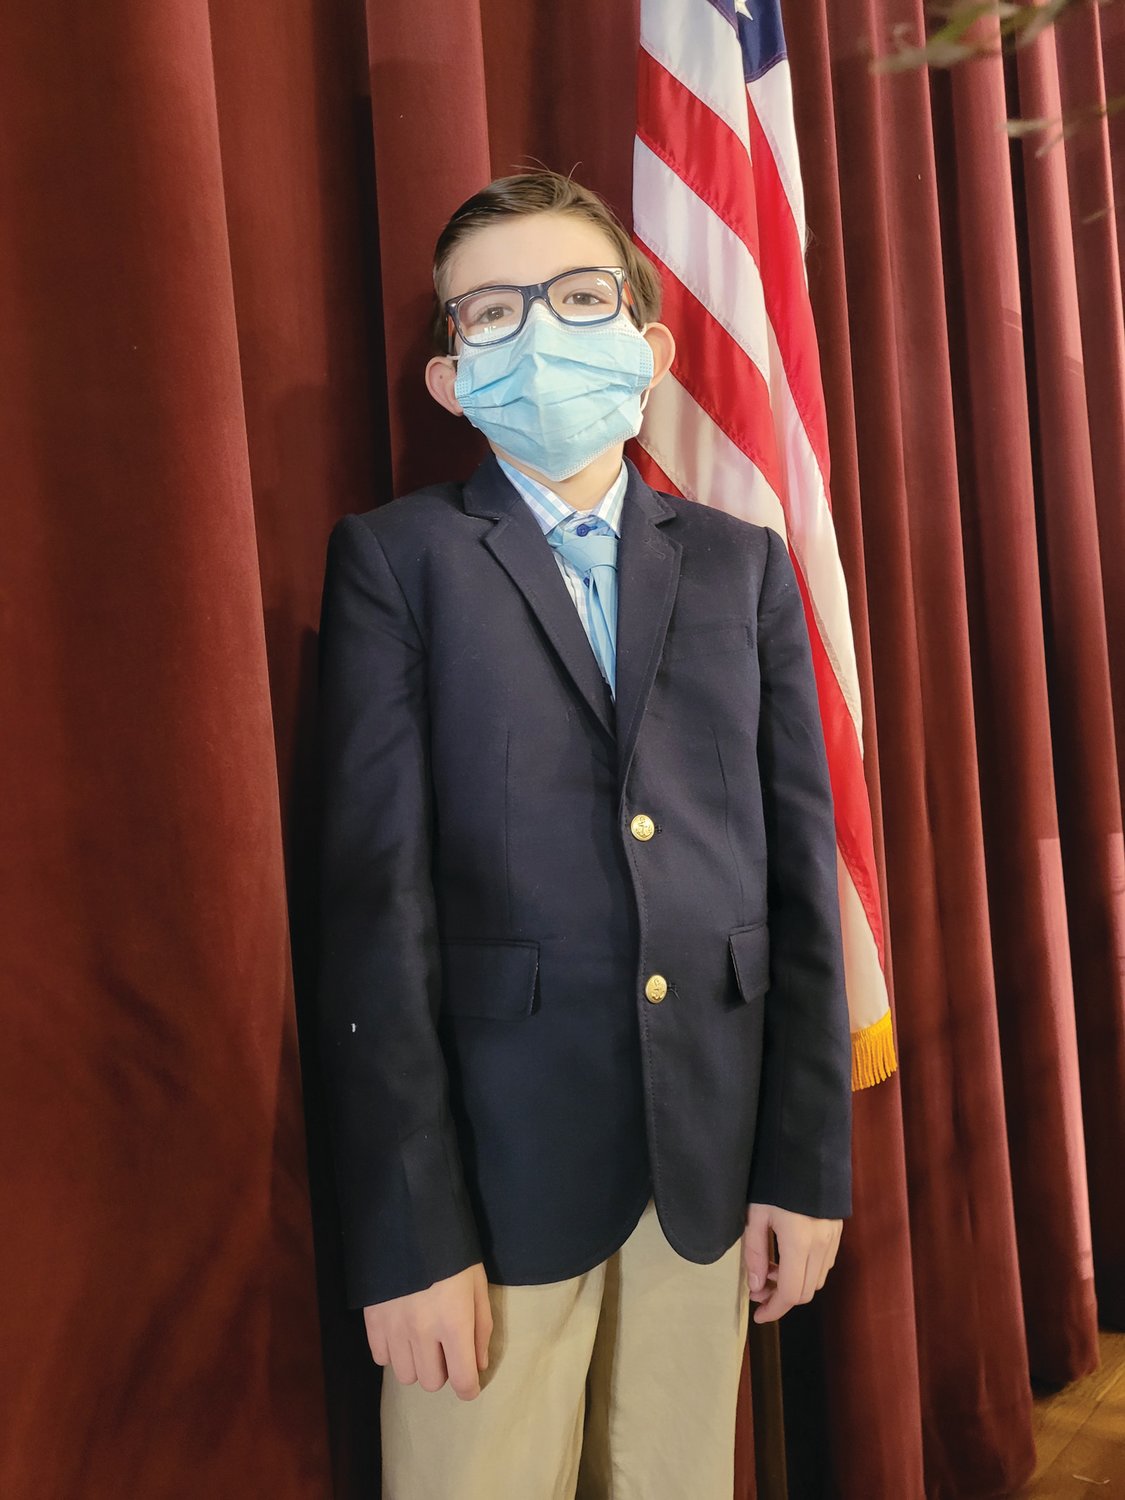 Sixth-grader Allessandro Cassisi-Wood, 11, of Providence, a sixth-grader at Saint Rocco School, wore a sports coat and tie to Career Day. He wants to be President of the United States when he grows up. (Sun Rise photo by Rory Schuler)